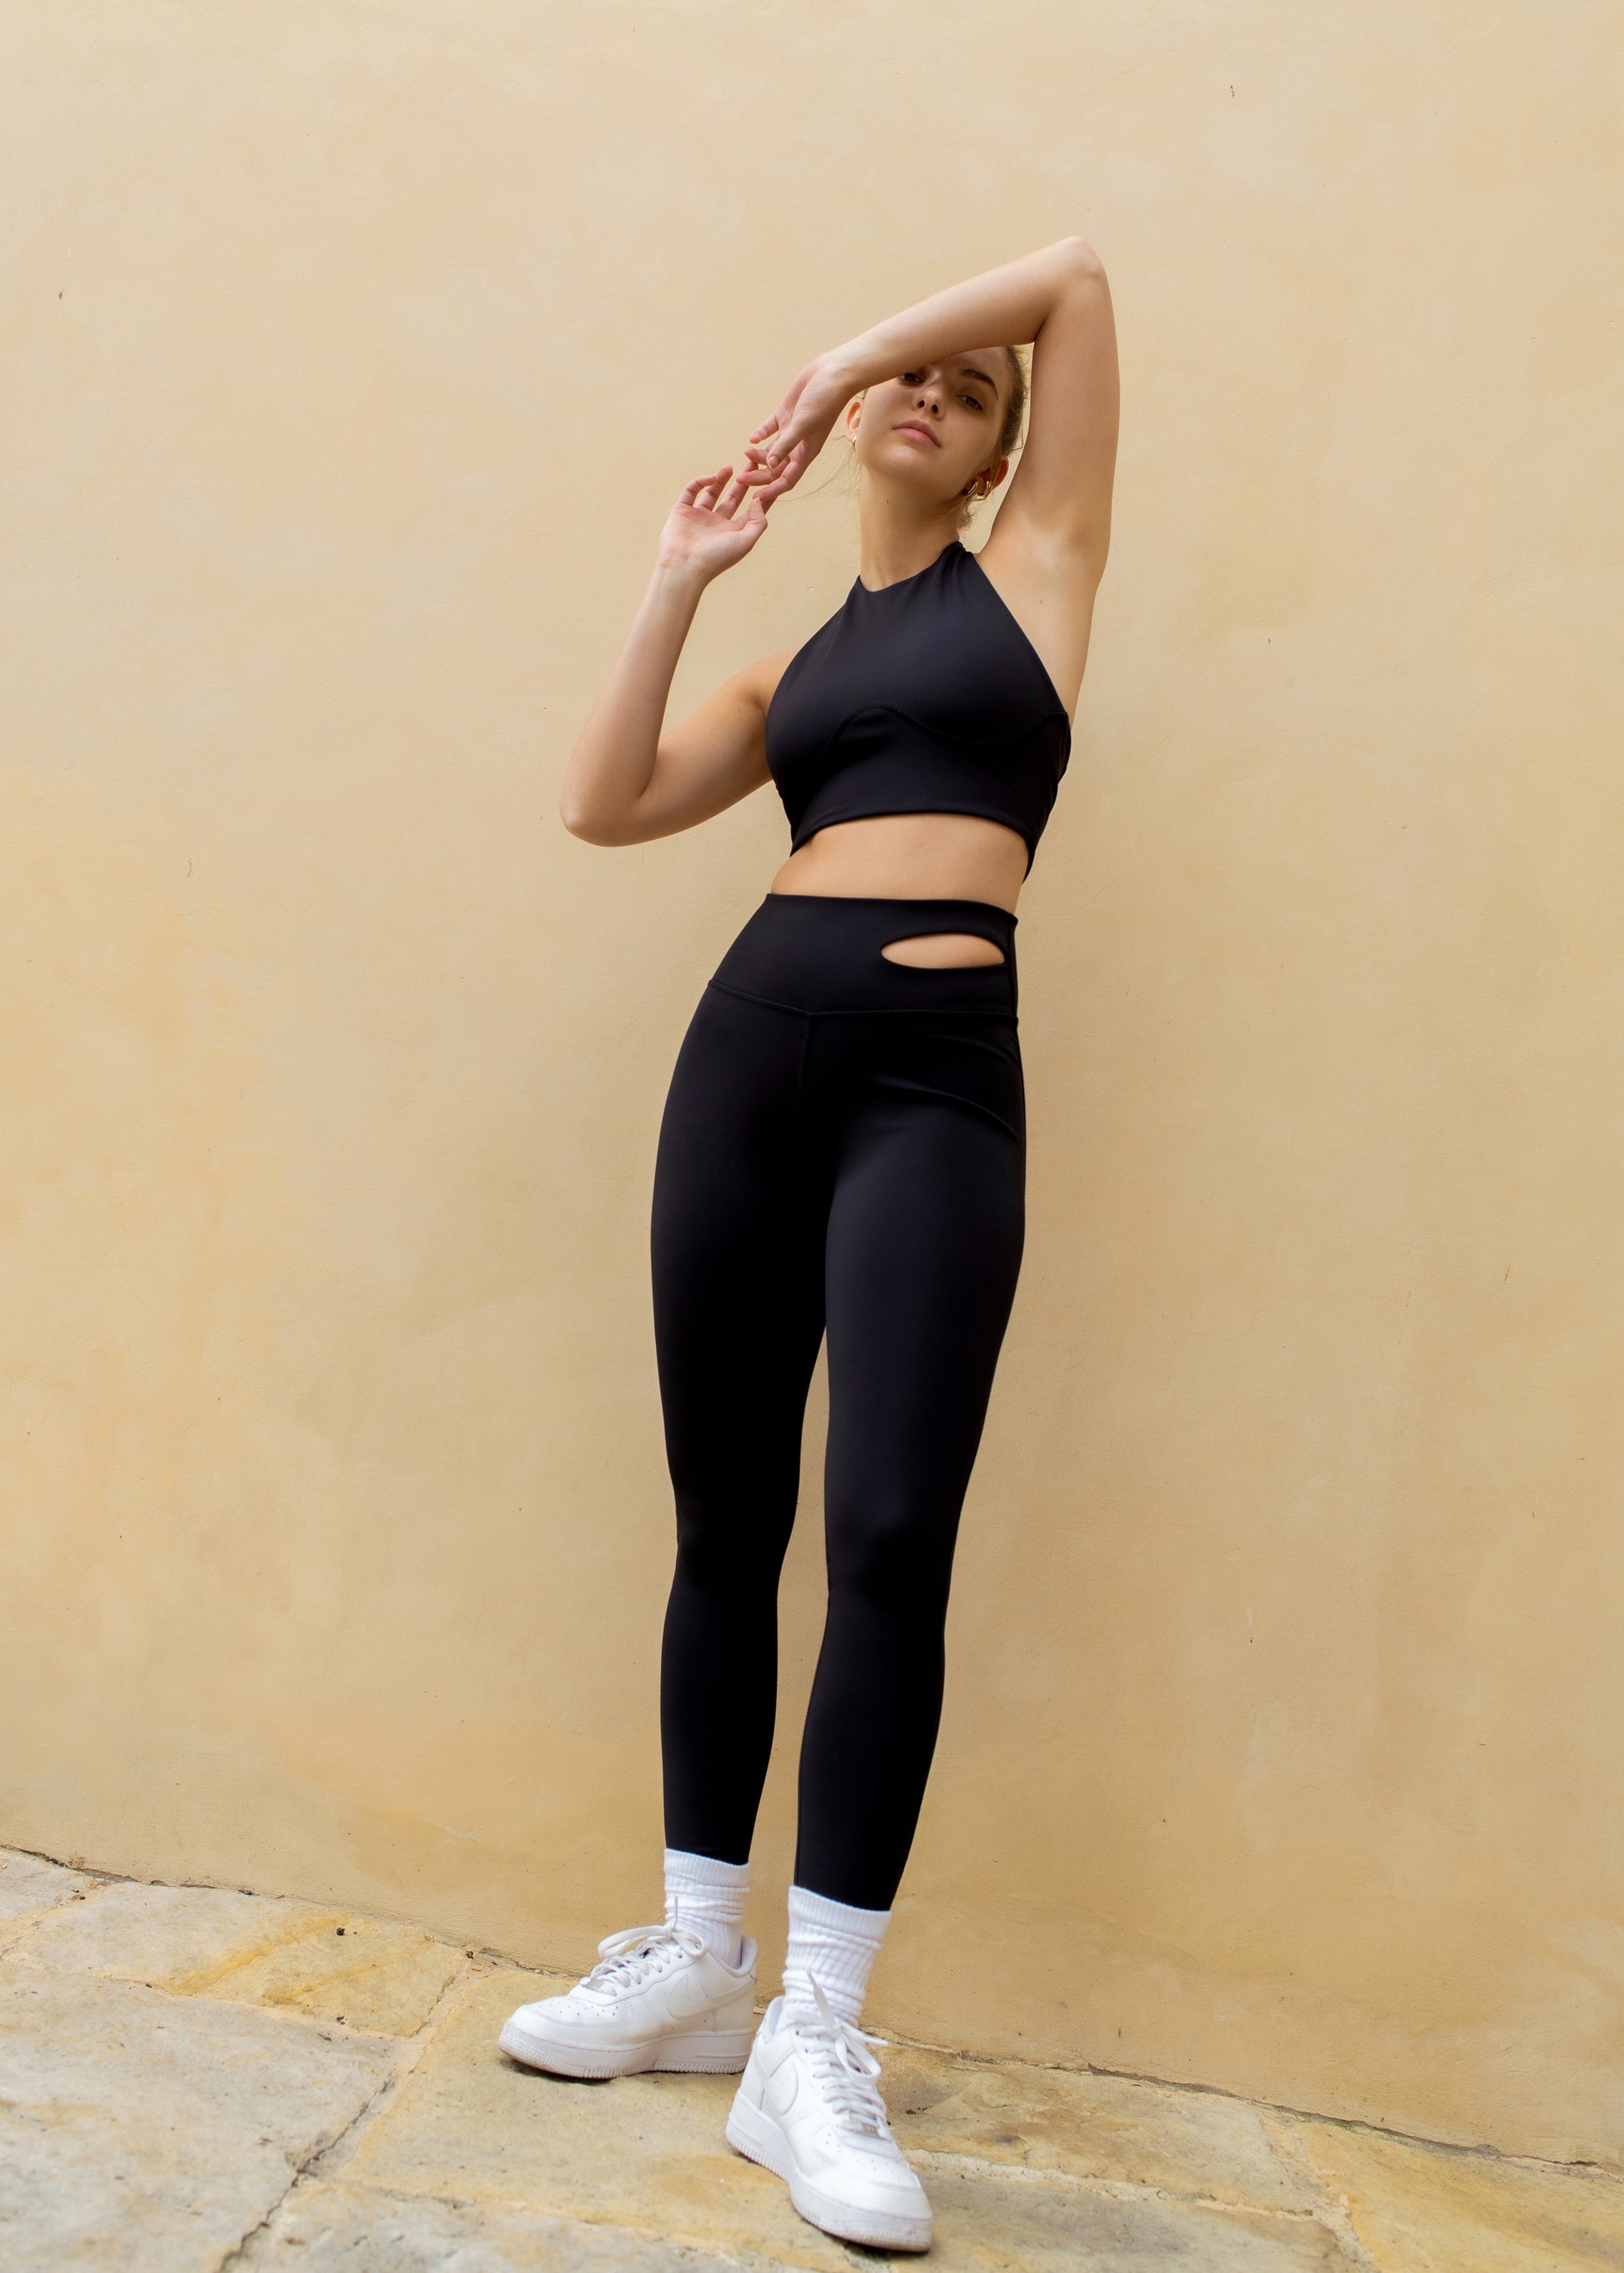 Haii Top Mawii Leggings Black Dark Womens Clothing Workout Clothes Loungewear Athleisure Sportswear Bras Crop Top Sports Bra Womens Top Compression High Waisted Fast Dry Cuts Design Asaiia Everywear Workout Sexy Support Cool Adjustable Open Back Halter Top Details